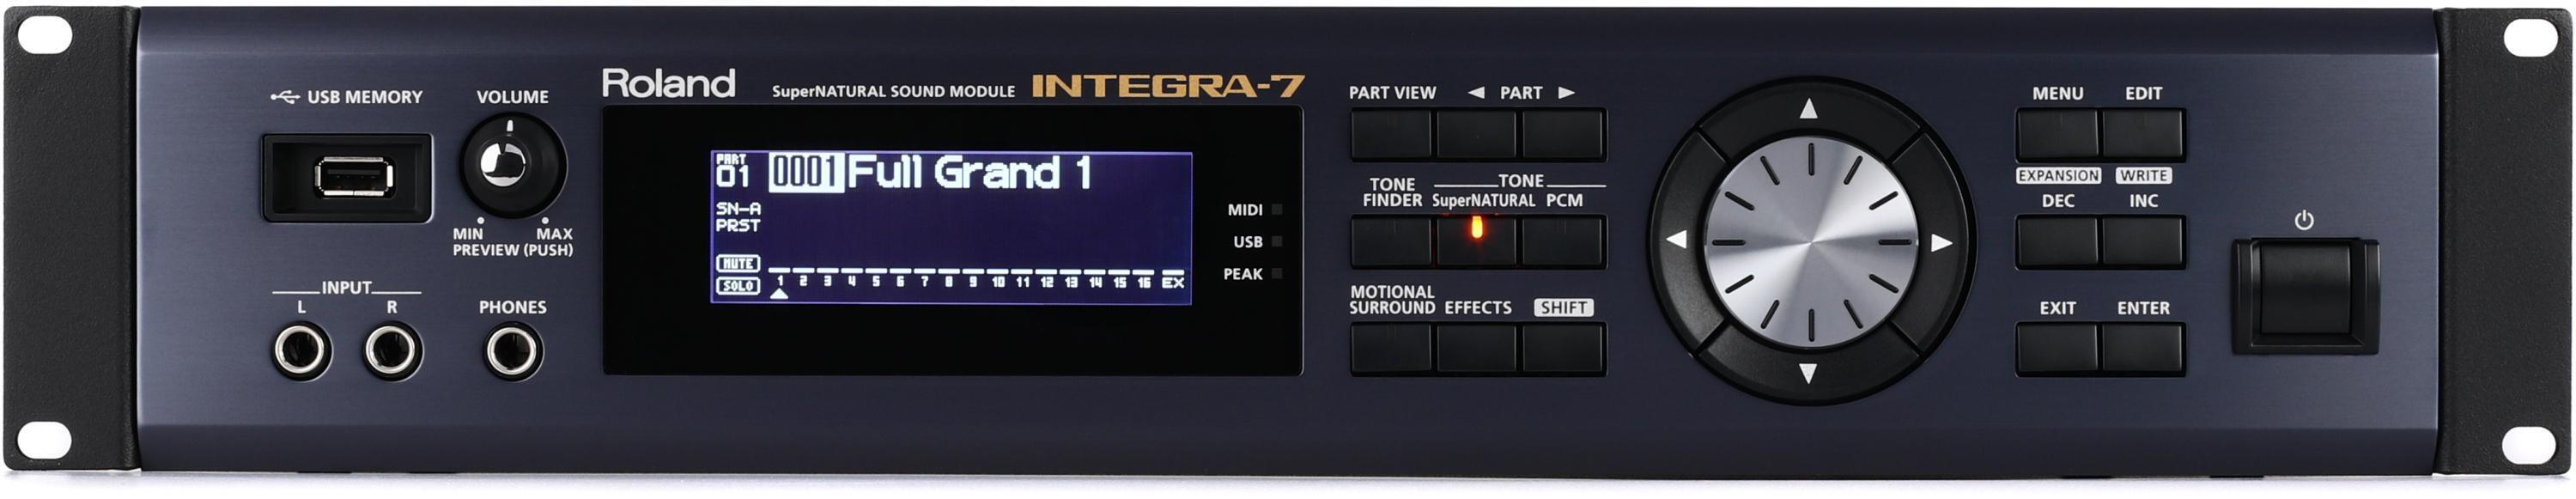 Roland Integra-7 Synthesizer Module | Sweetwater